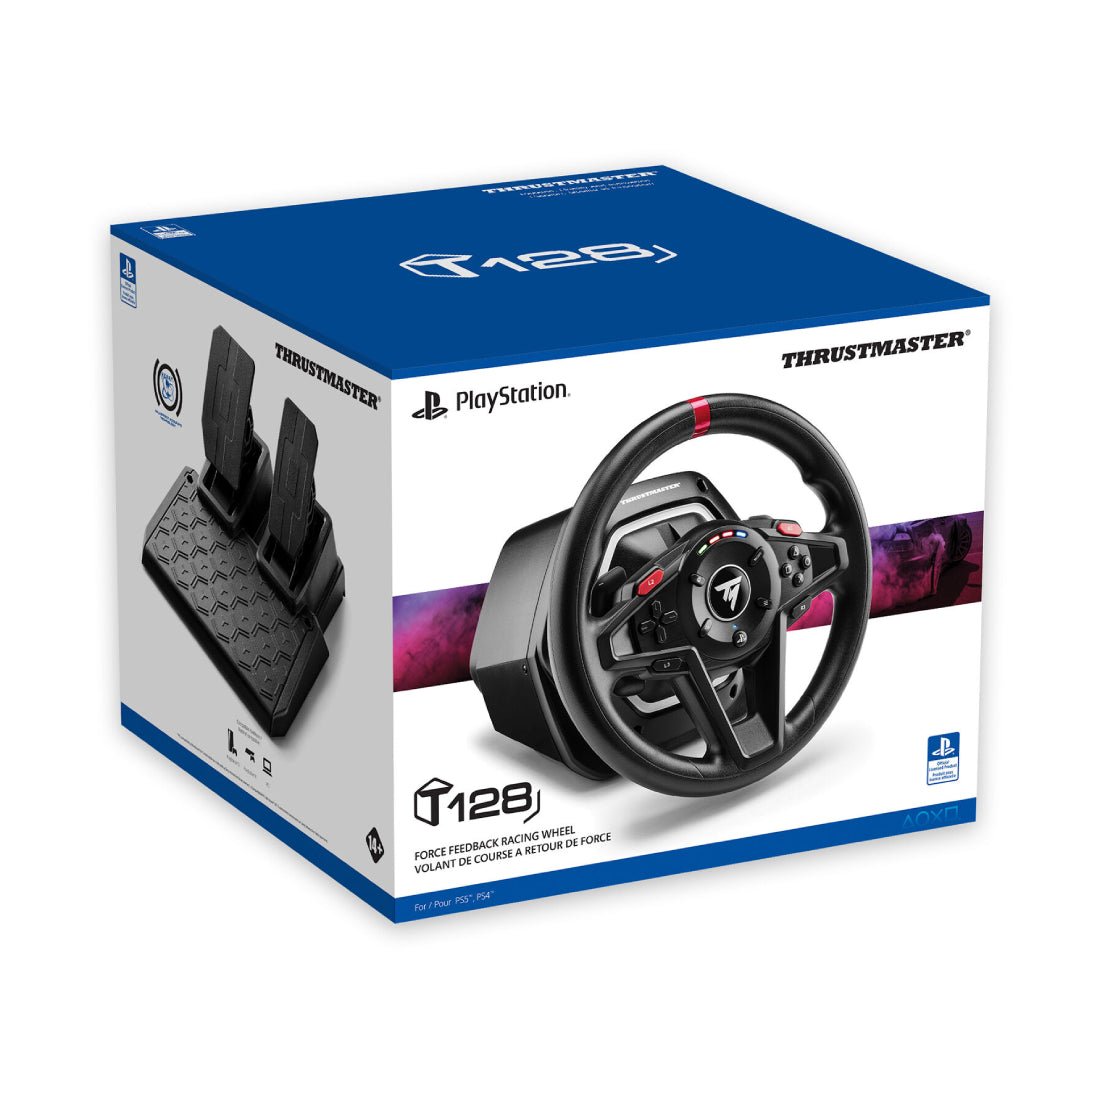 Thrustmaster T128 Racing Wheel and Pedal Set - PS 4/5 & PC - محاكي - Store 974 | ستور ٩٧٤